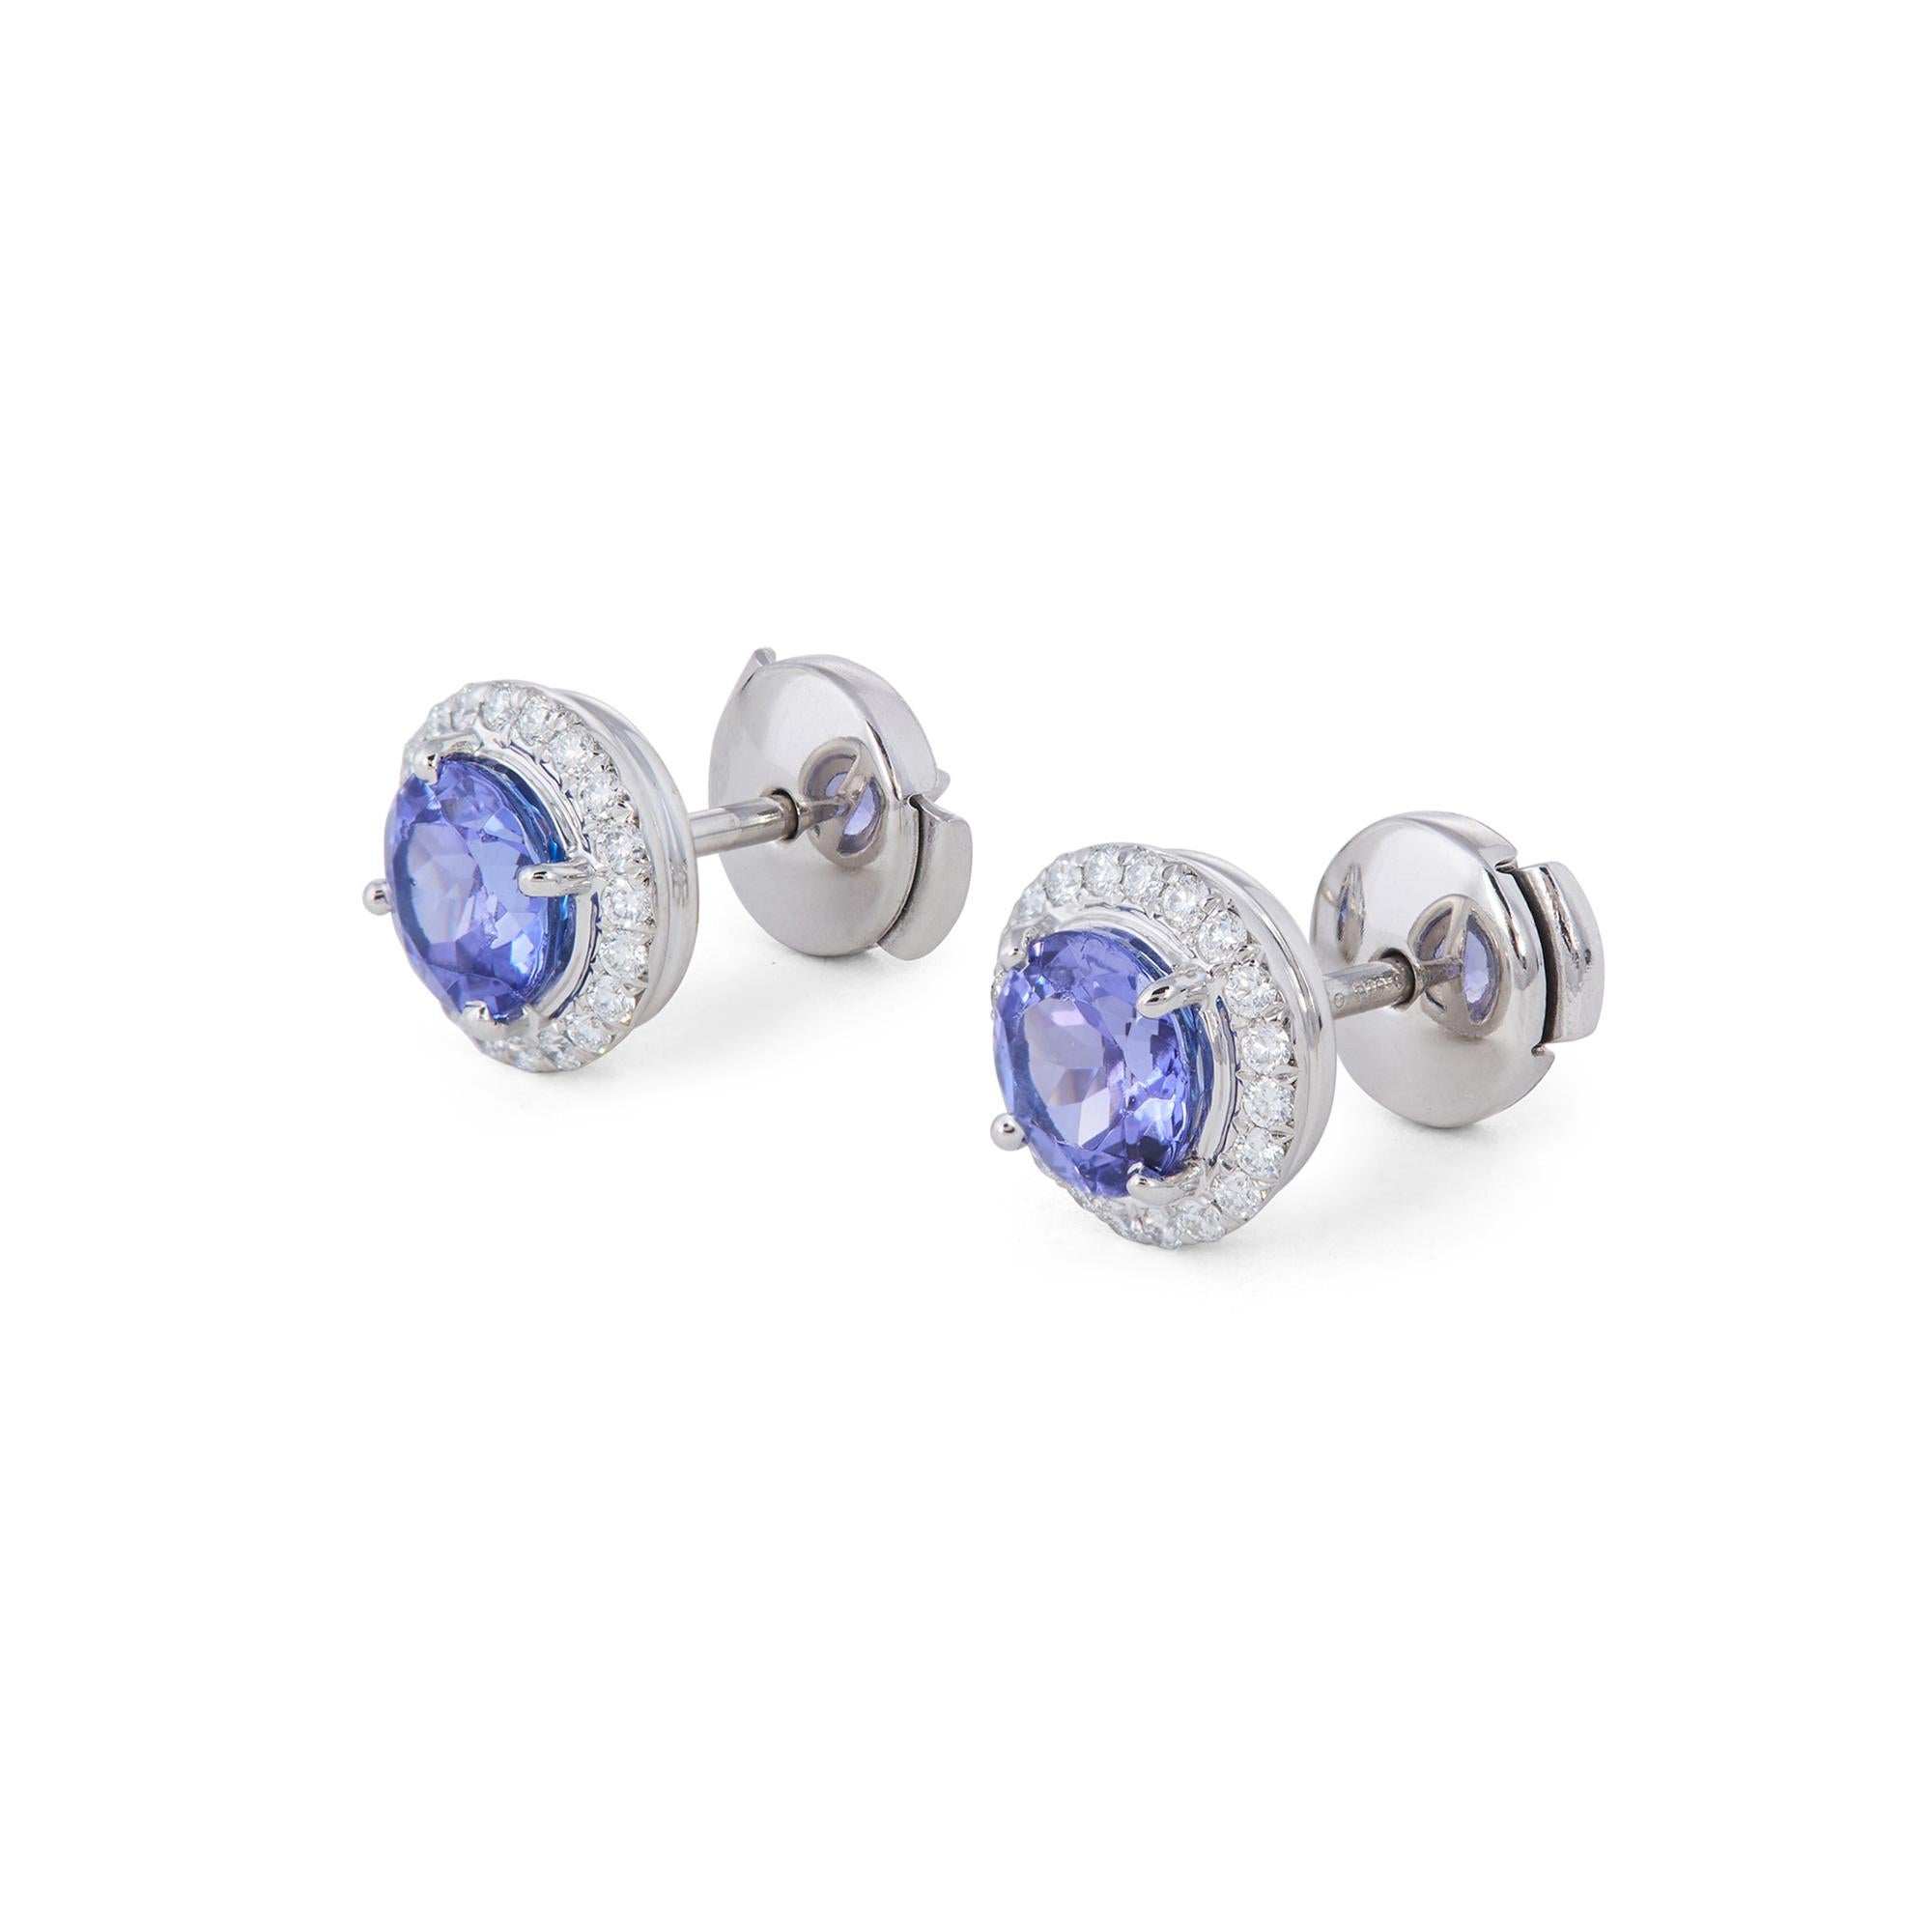 Authentic Tiffany & Co. 'Soleste' earrings each center on a round tanzanite stone weighing approximately 1.20ct surrounded by high quality round brilliant cut diamonds of an estimated 0.19 carats. Signed Tiffany & Co., PT950. The earrings are